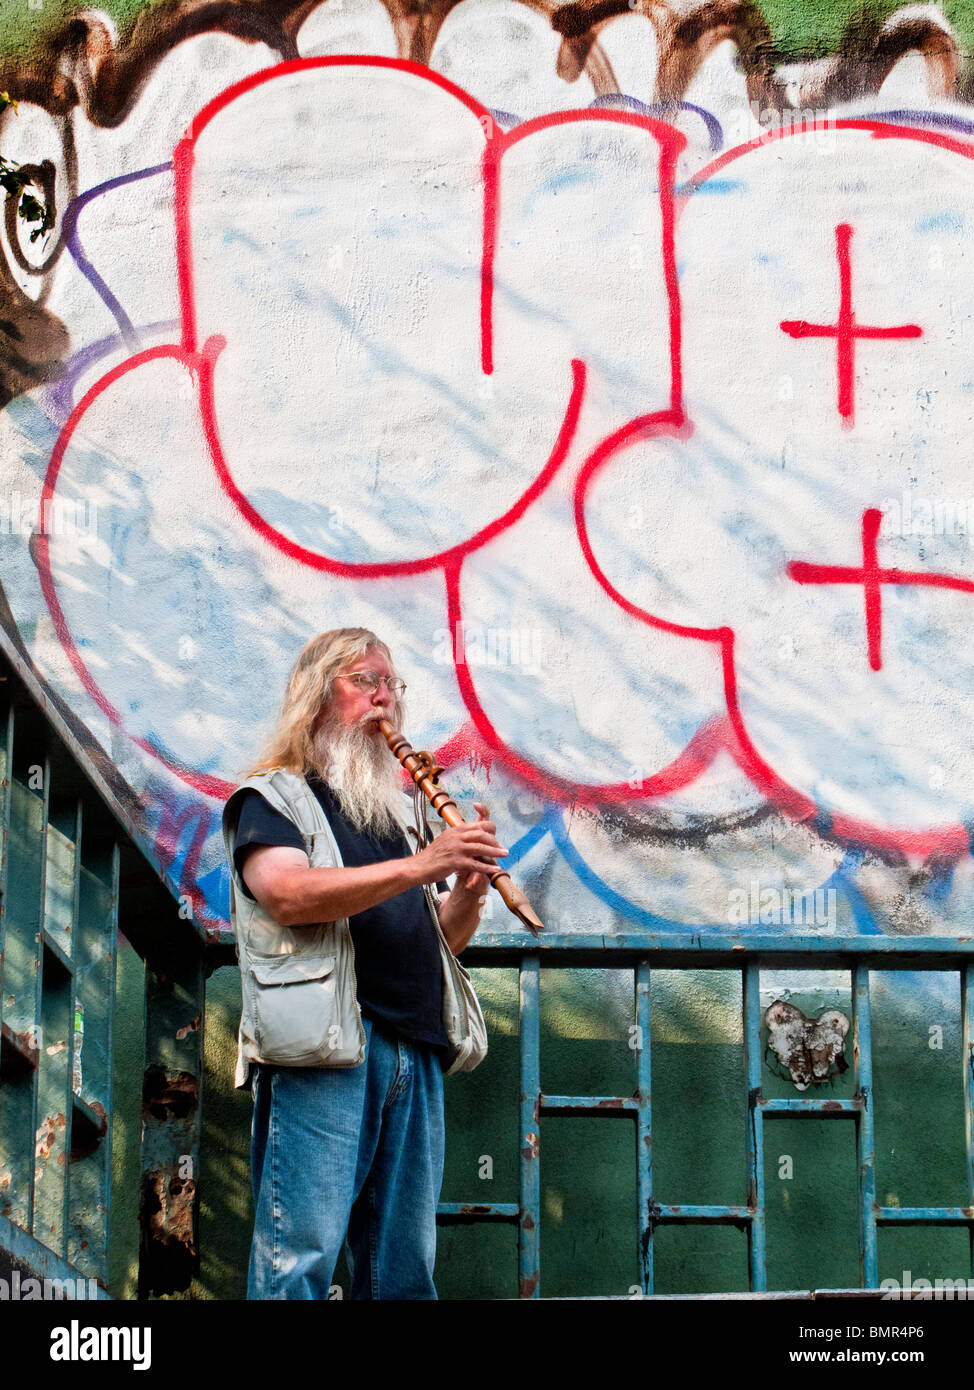 Juxtaposed with a large gang grafitti, a bearded street musician plays his flute on New York City's Lower East Side. Stock Photo